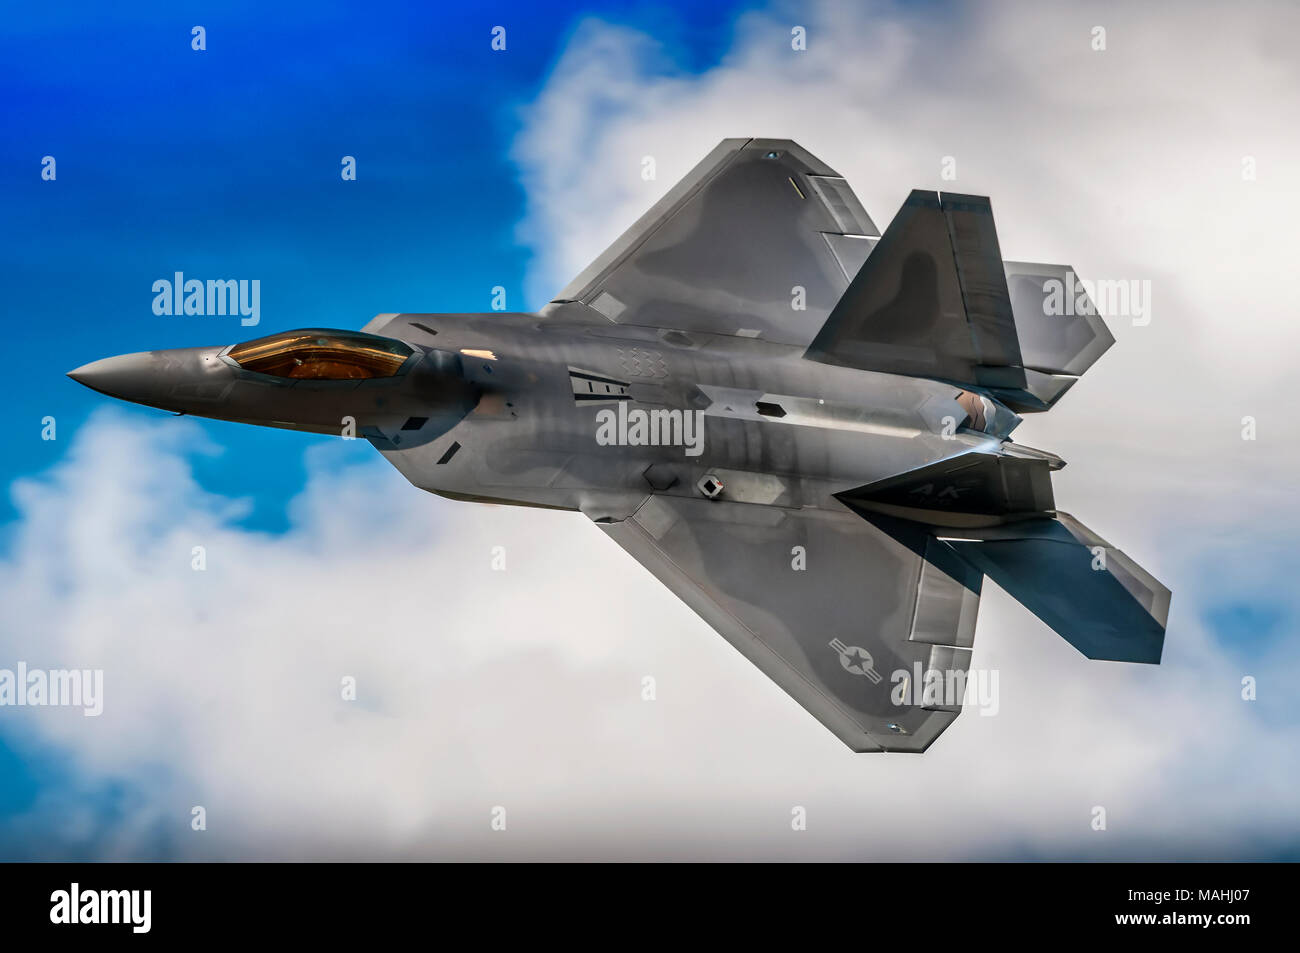 USAF F22 Raptor Stealth Fighter Aircraft Stock Photo